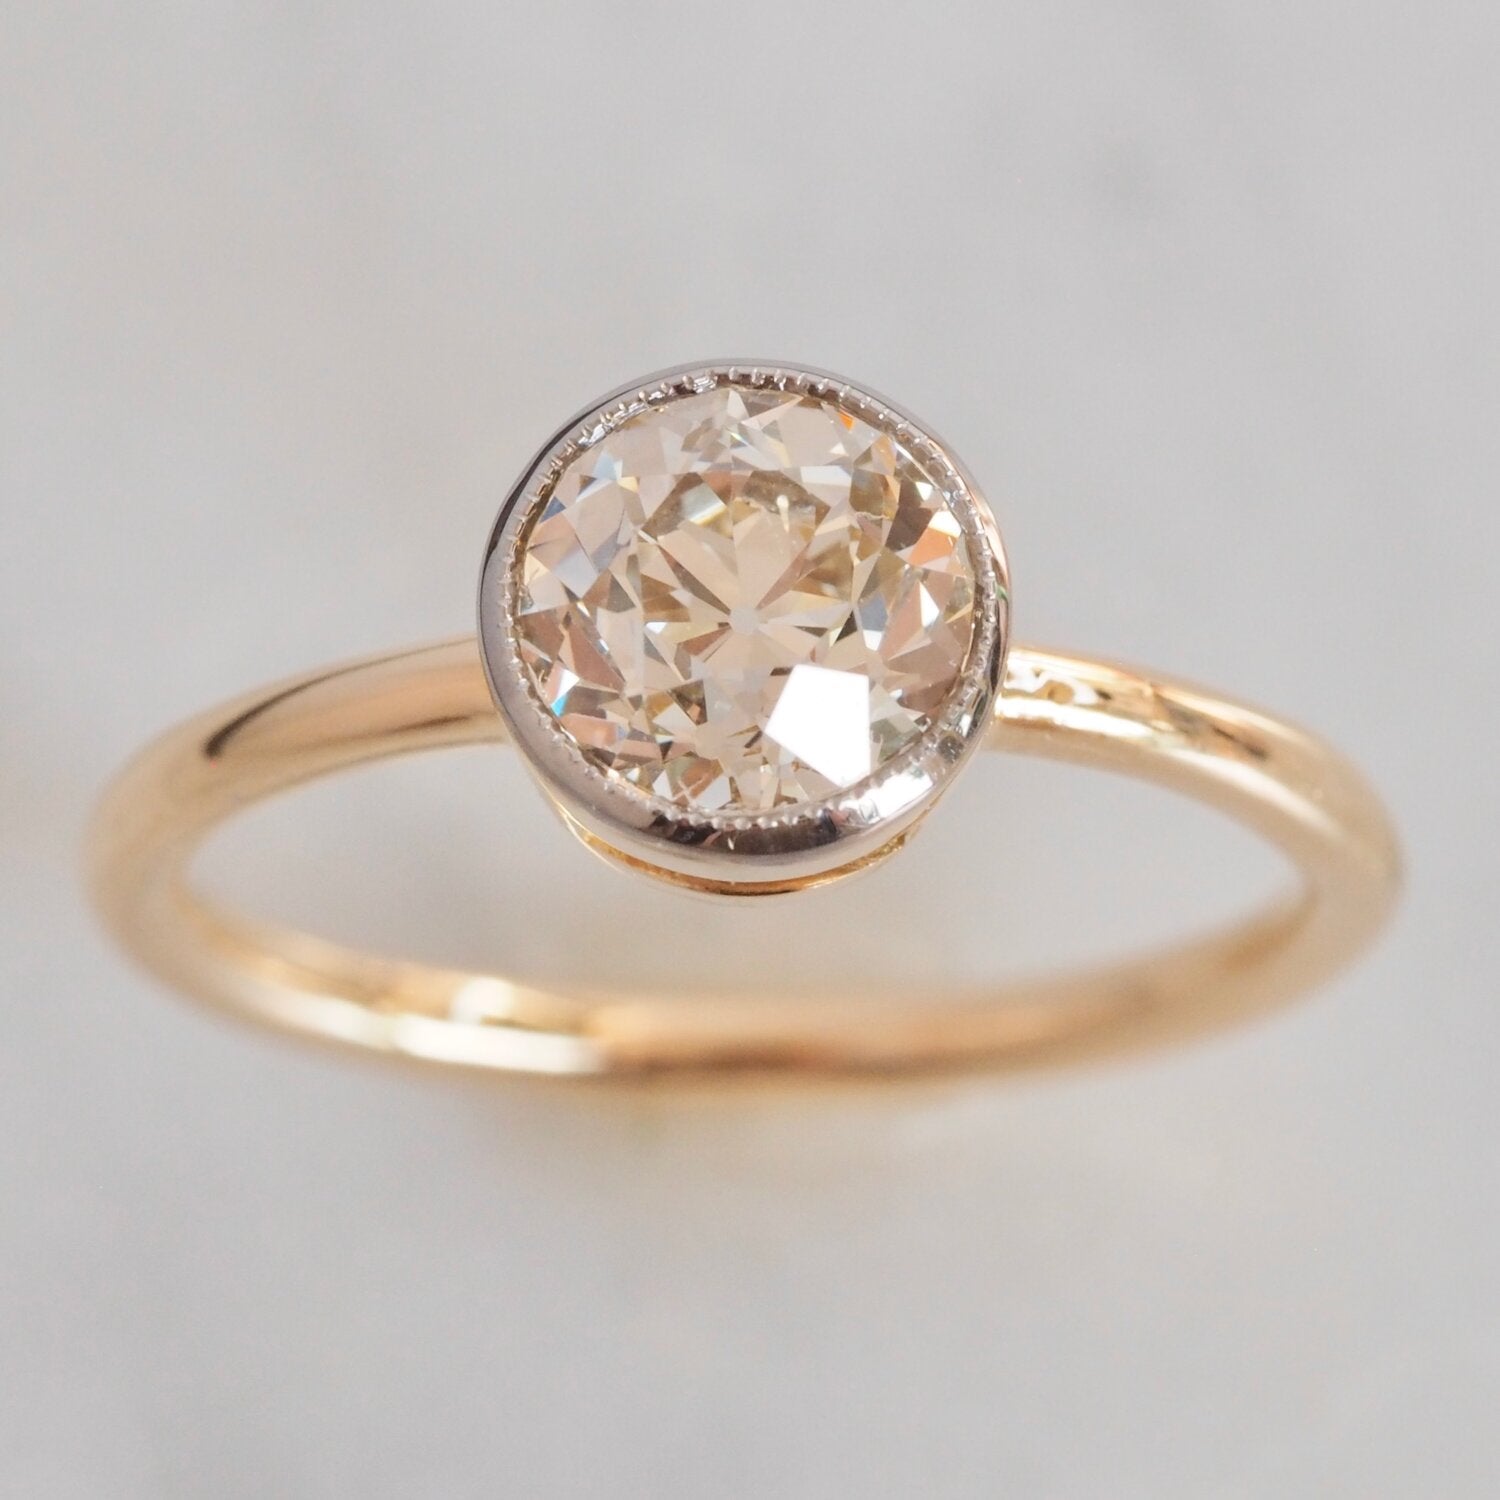 18k Gold Engagement Ring with Antique Old European Cut Diamond